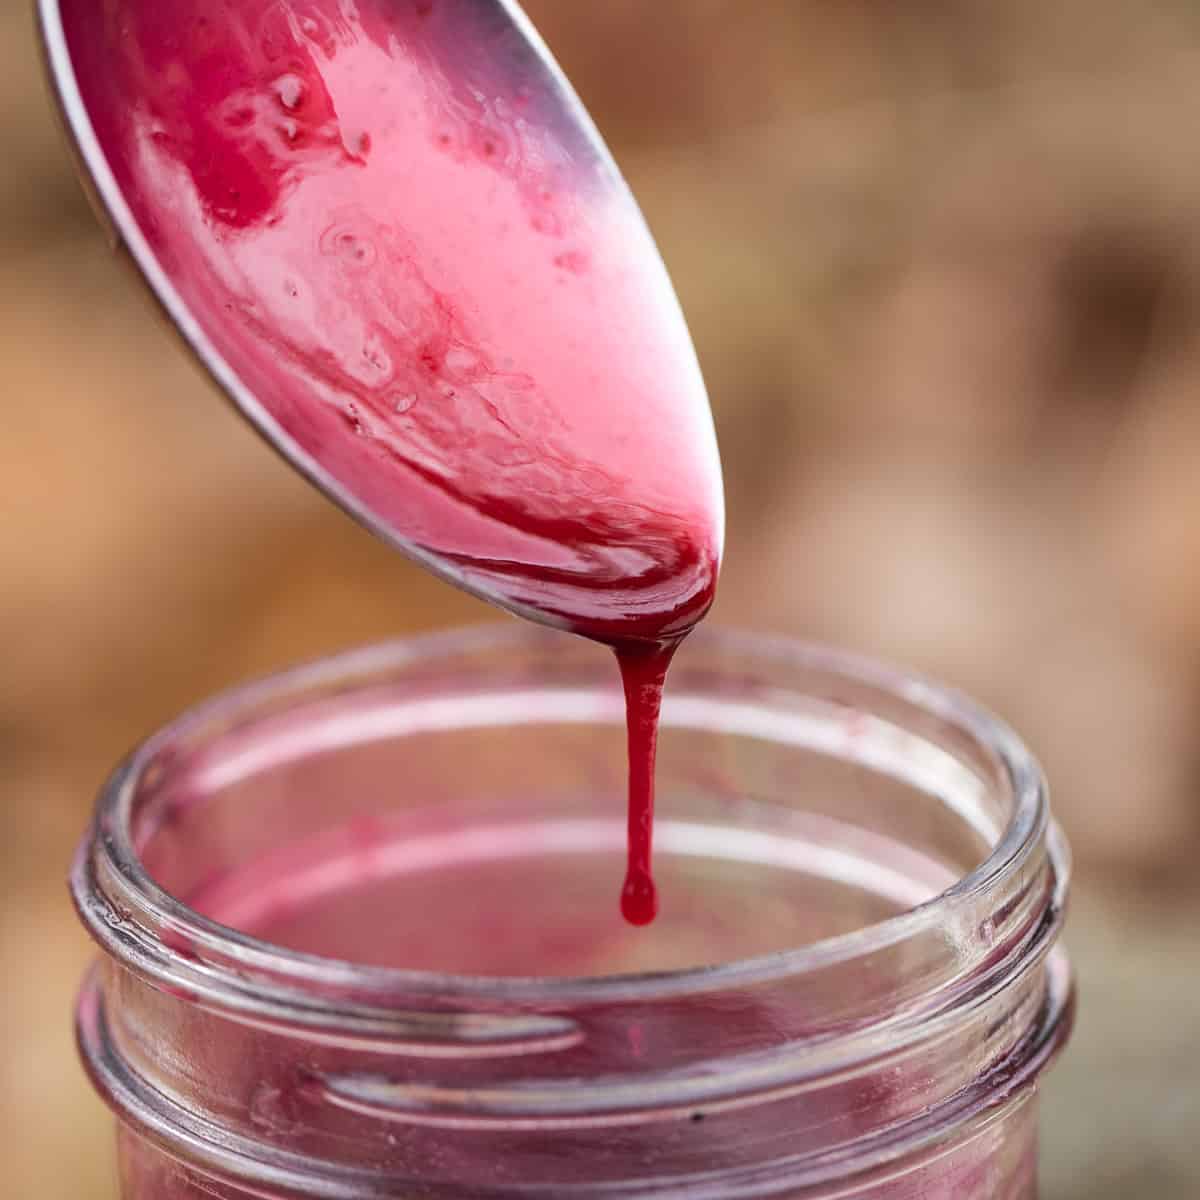 pink berry sauce dripping from a spoon 